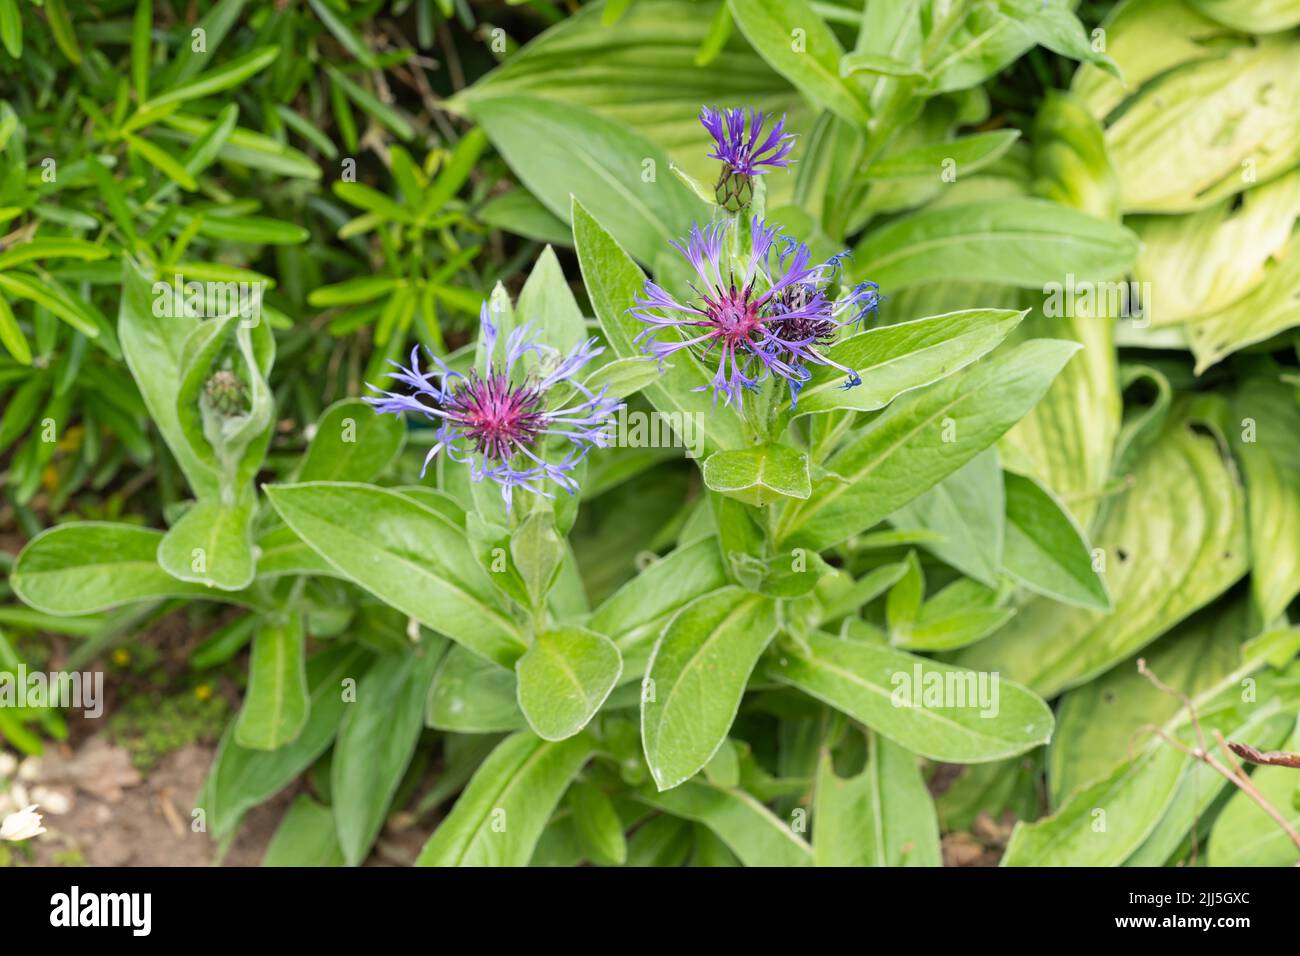 Centaurea montana (Cyanus Montanus L. Hill, commonly known as the perennial cornflower, also mountain bluet / great blue bottle) in July, England Stock Photo